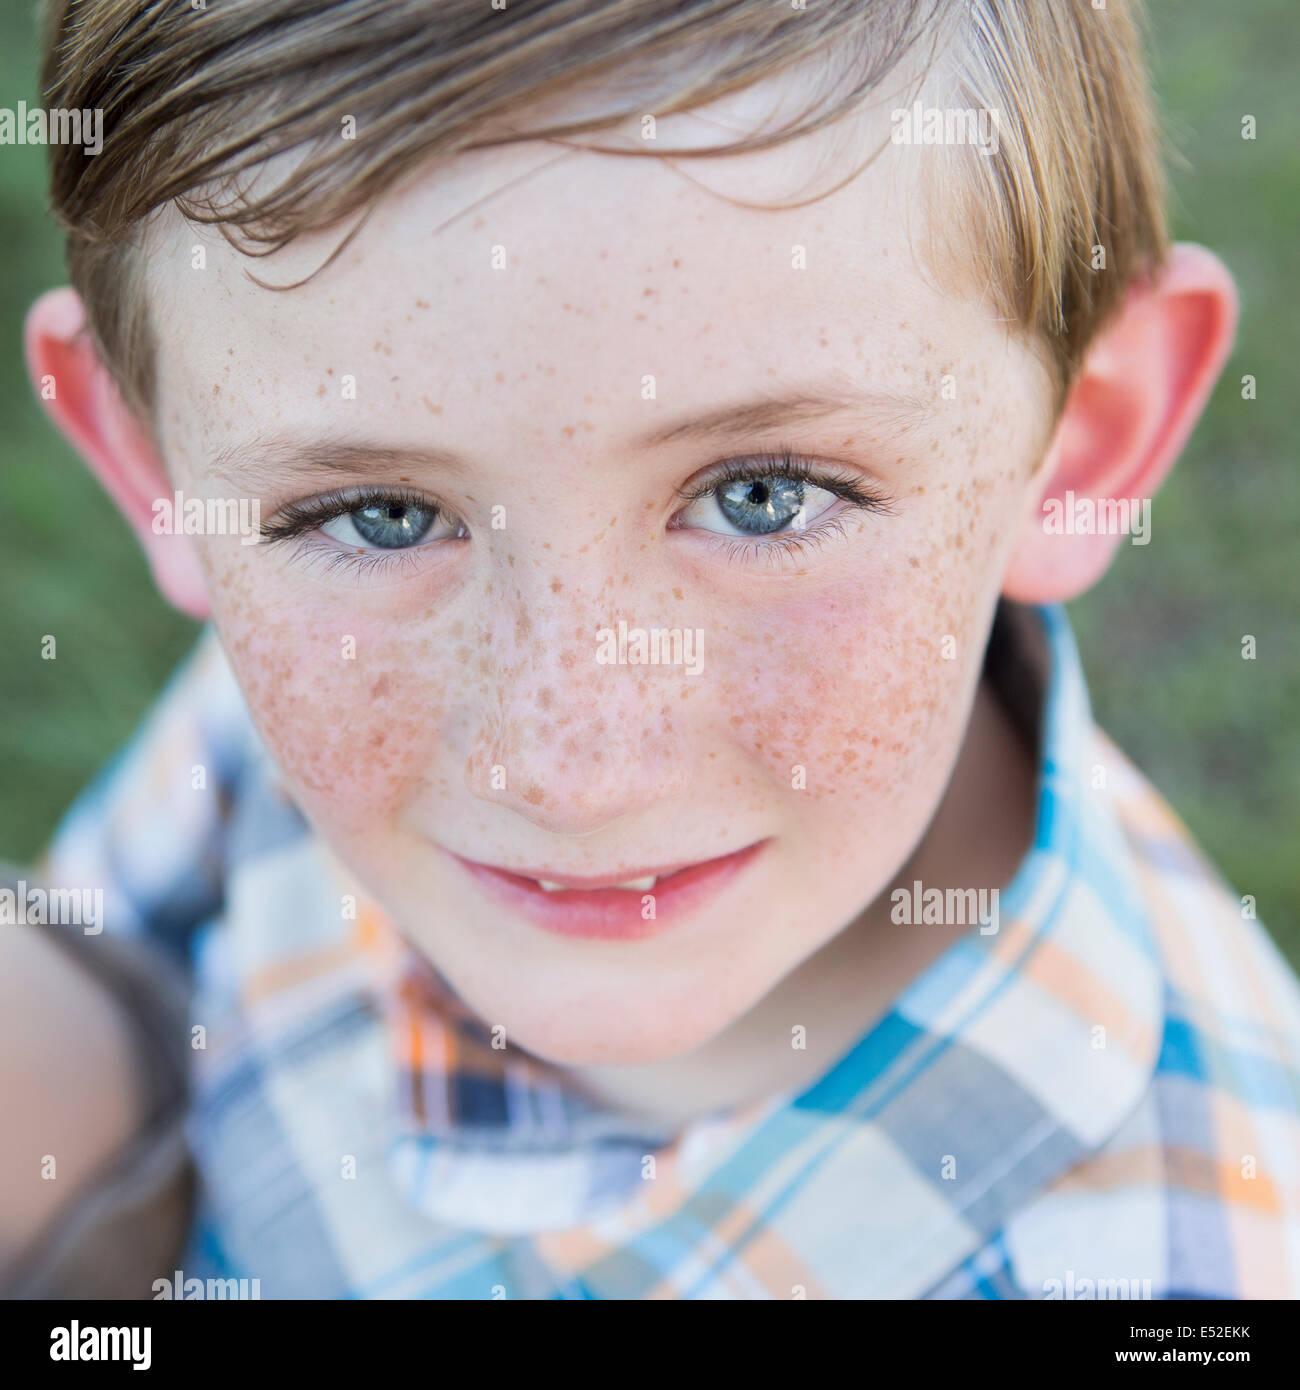 Portrait of a young boy with blue eyes and freckles on his ...